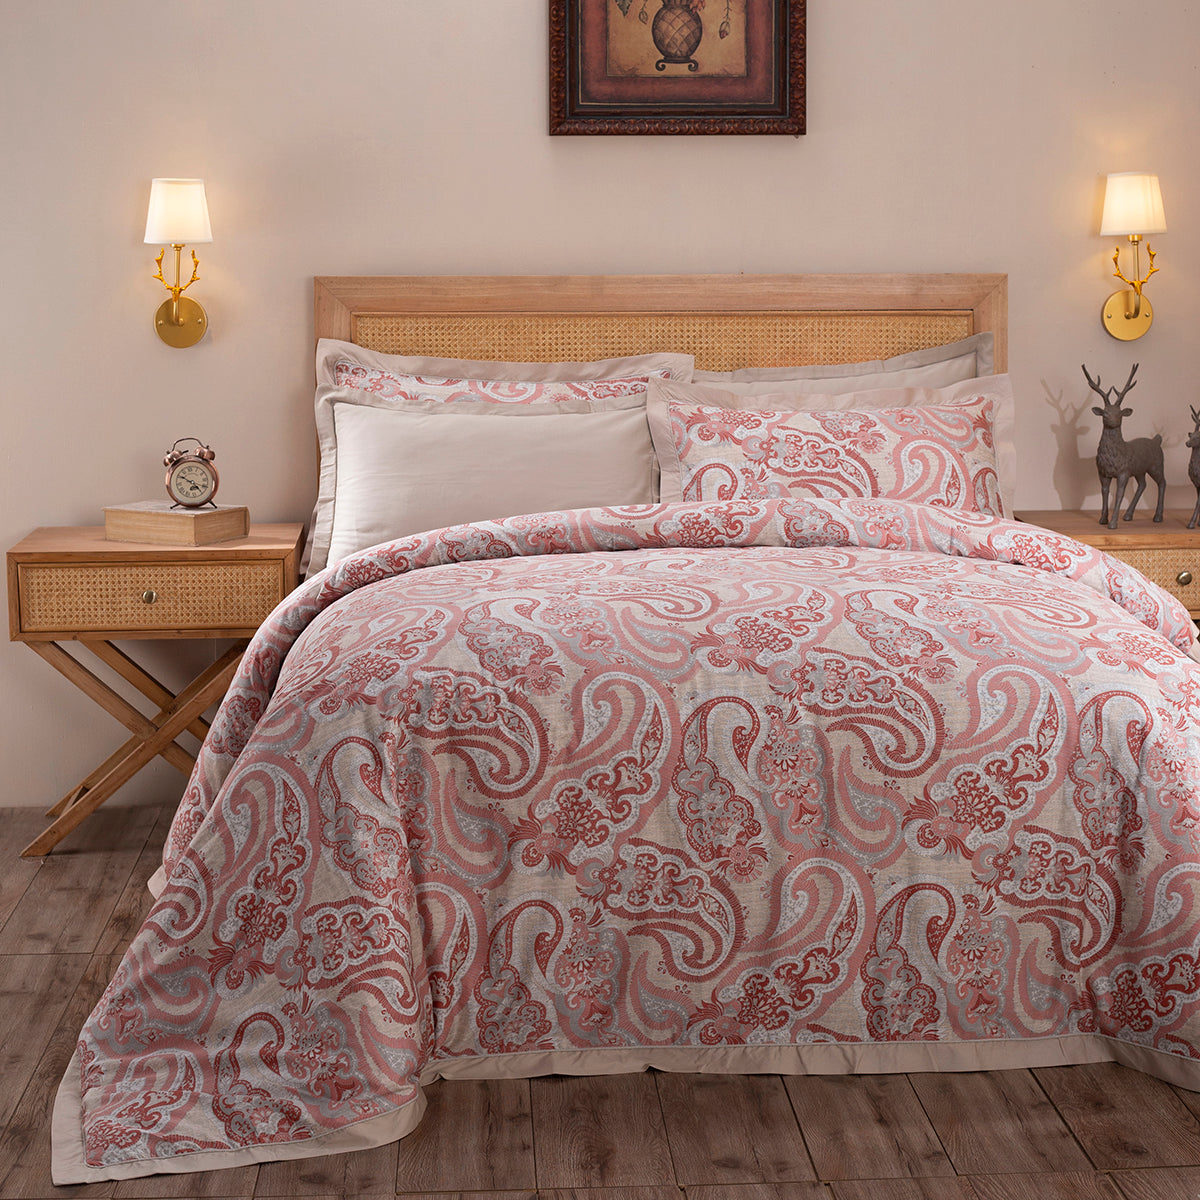 Exotic Heritage Modern Paisely Printed 100% Cotton Super Soft Red Duvet Cover with Pillow Case